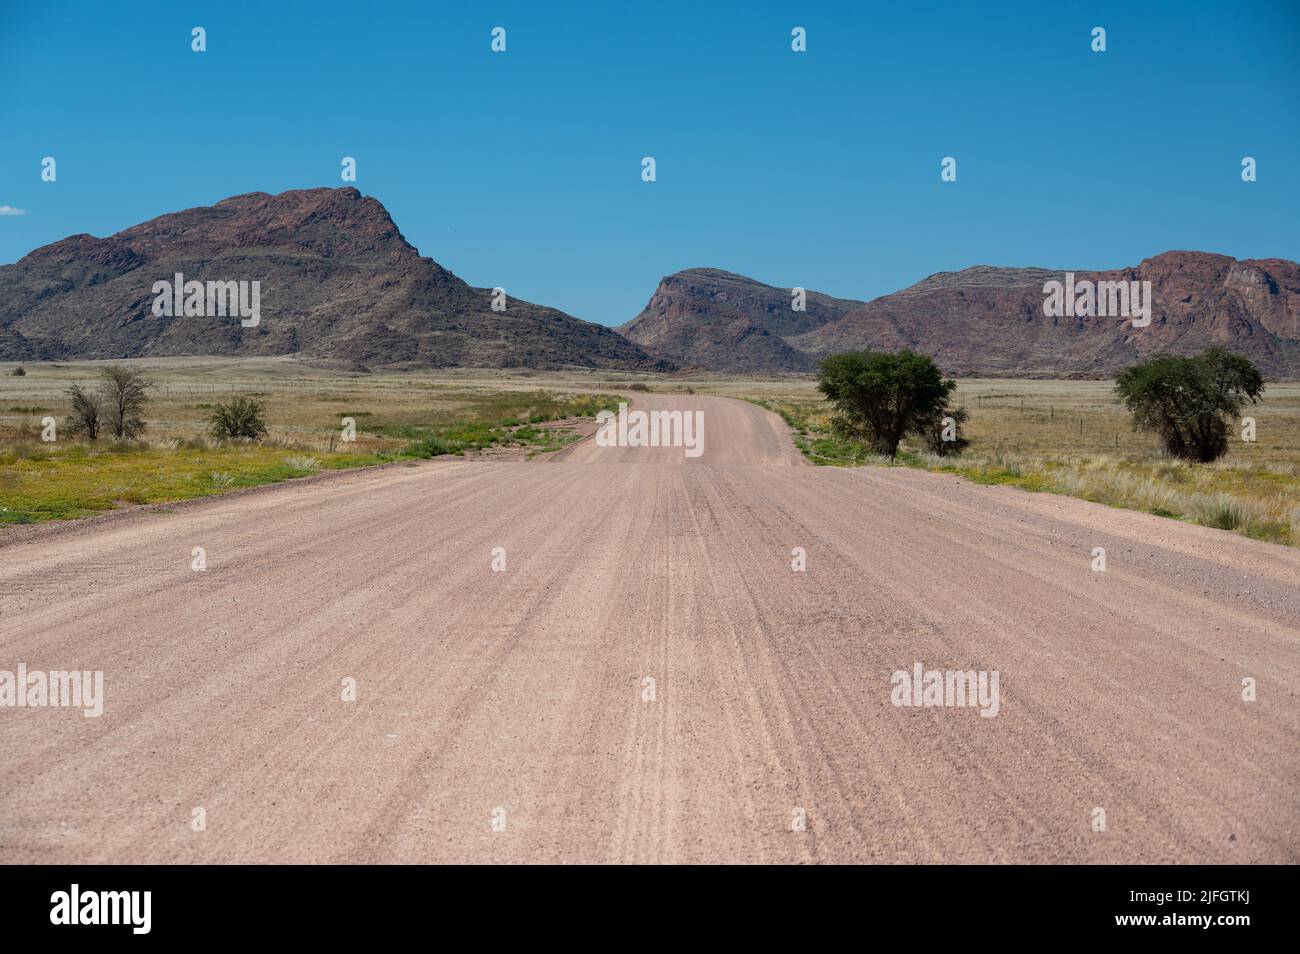 Road trip on a gravel road in Namibia Arika Stock Photo